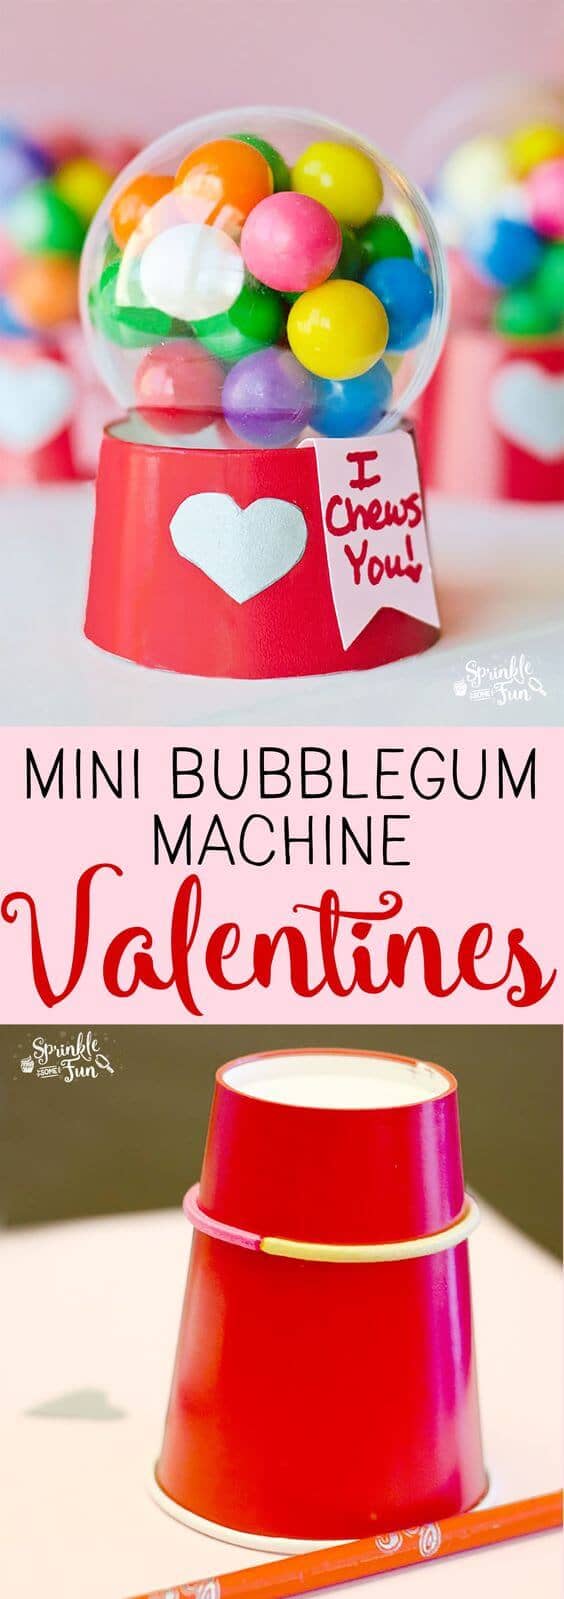 DIY Red Solo Cup Gumball Machine Favors